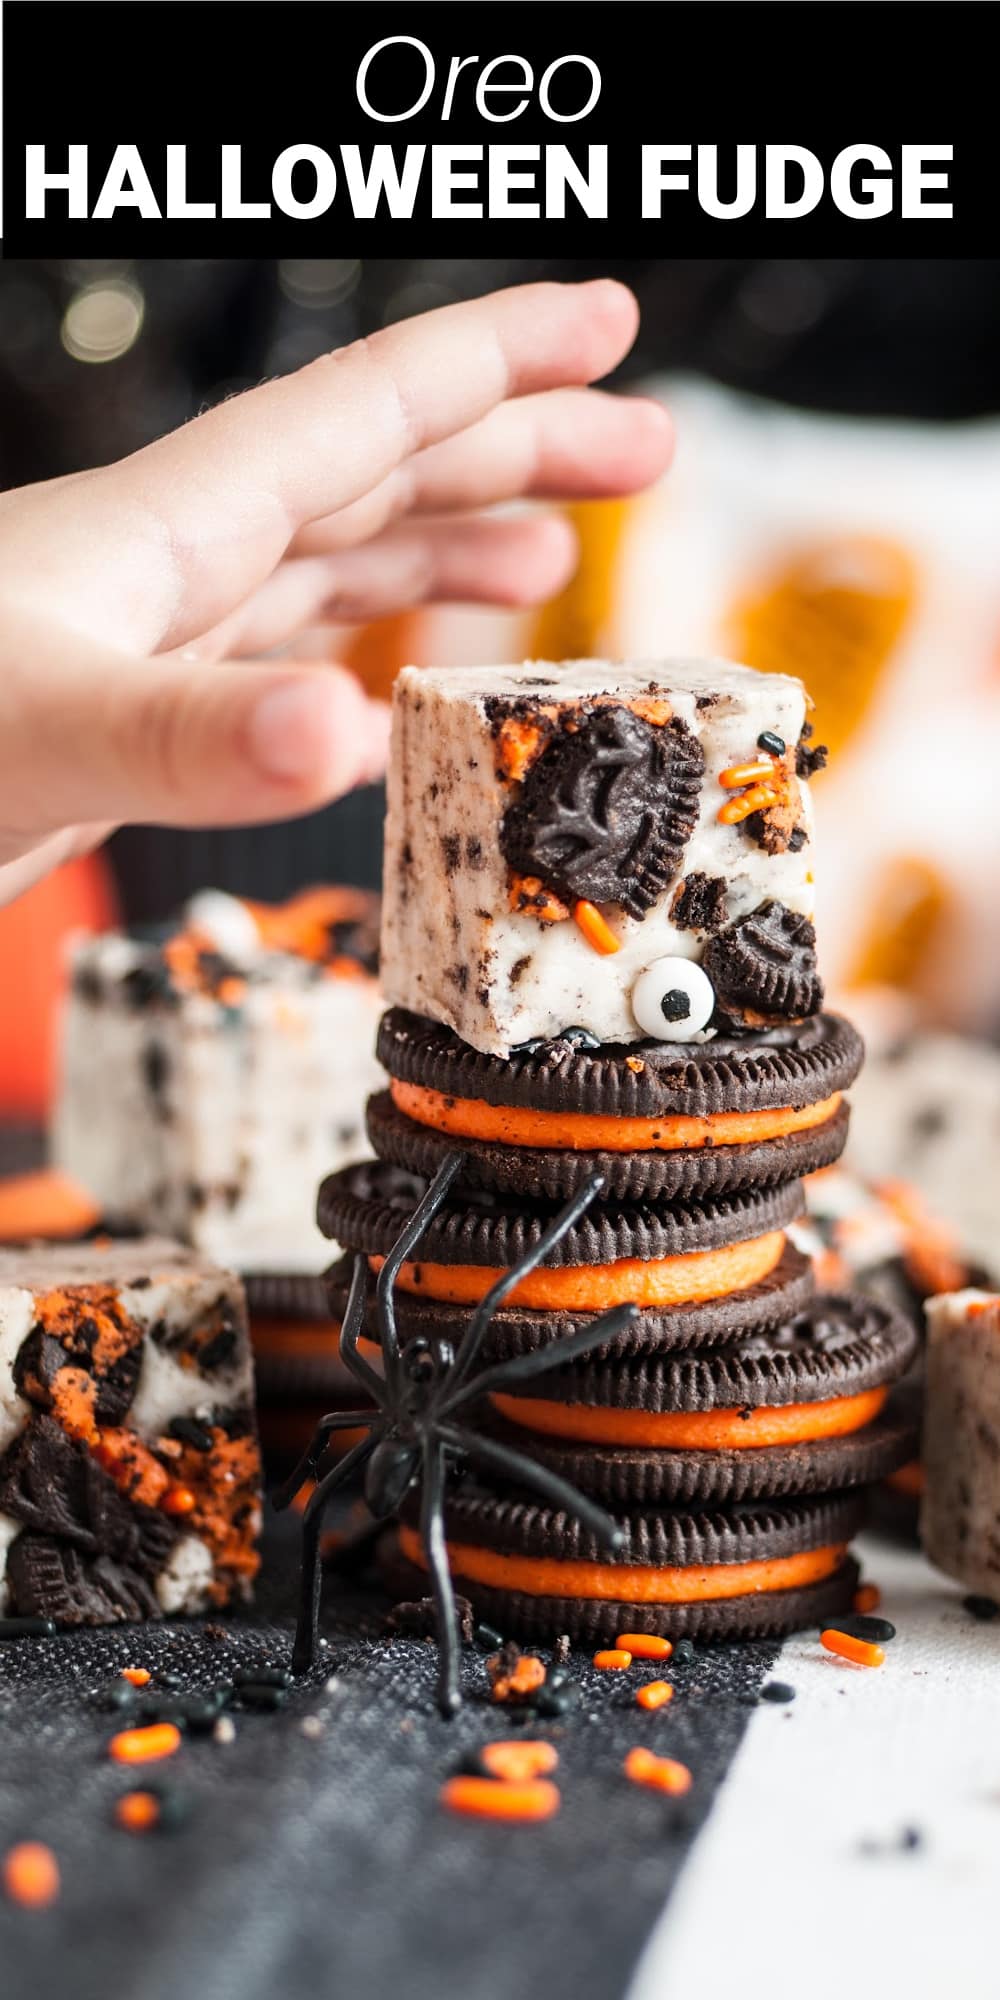 This Halloween cookie fudge is a fun and easy recipe with a spooky look that’s perfect for your Halloween party. Creamy white chocolate is combined with real butter and sweetened condensed milk, then mixed with crushed Oreo cookies to create a rich and delicious fudge with an incredible cookies and cream flavor. It’s then topped with Halloween sprinkles and candy eyeballs to create an unforgettable party treat.